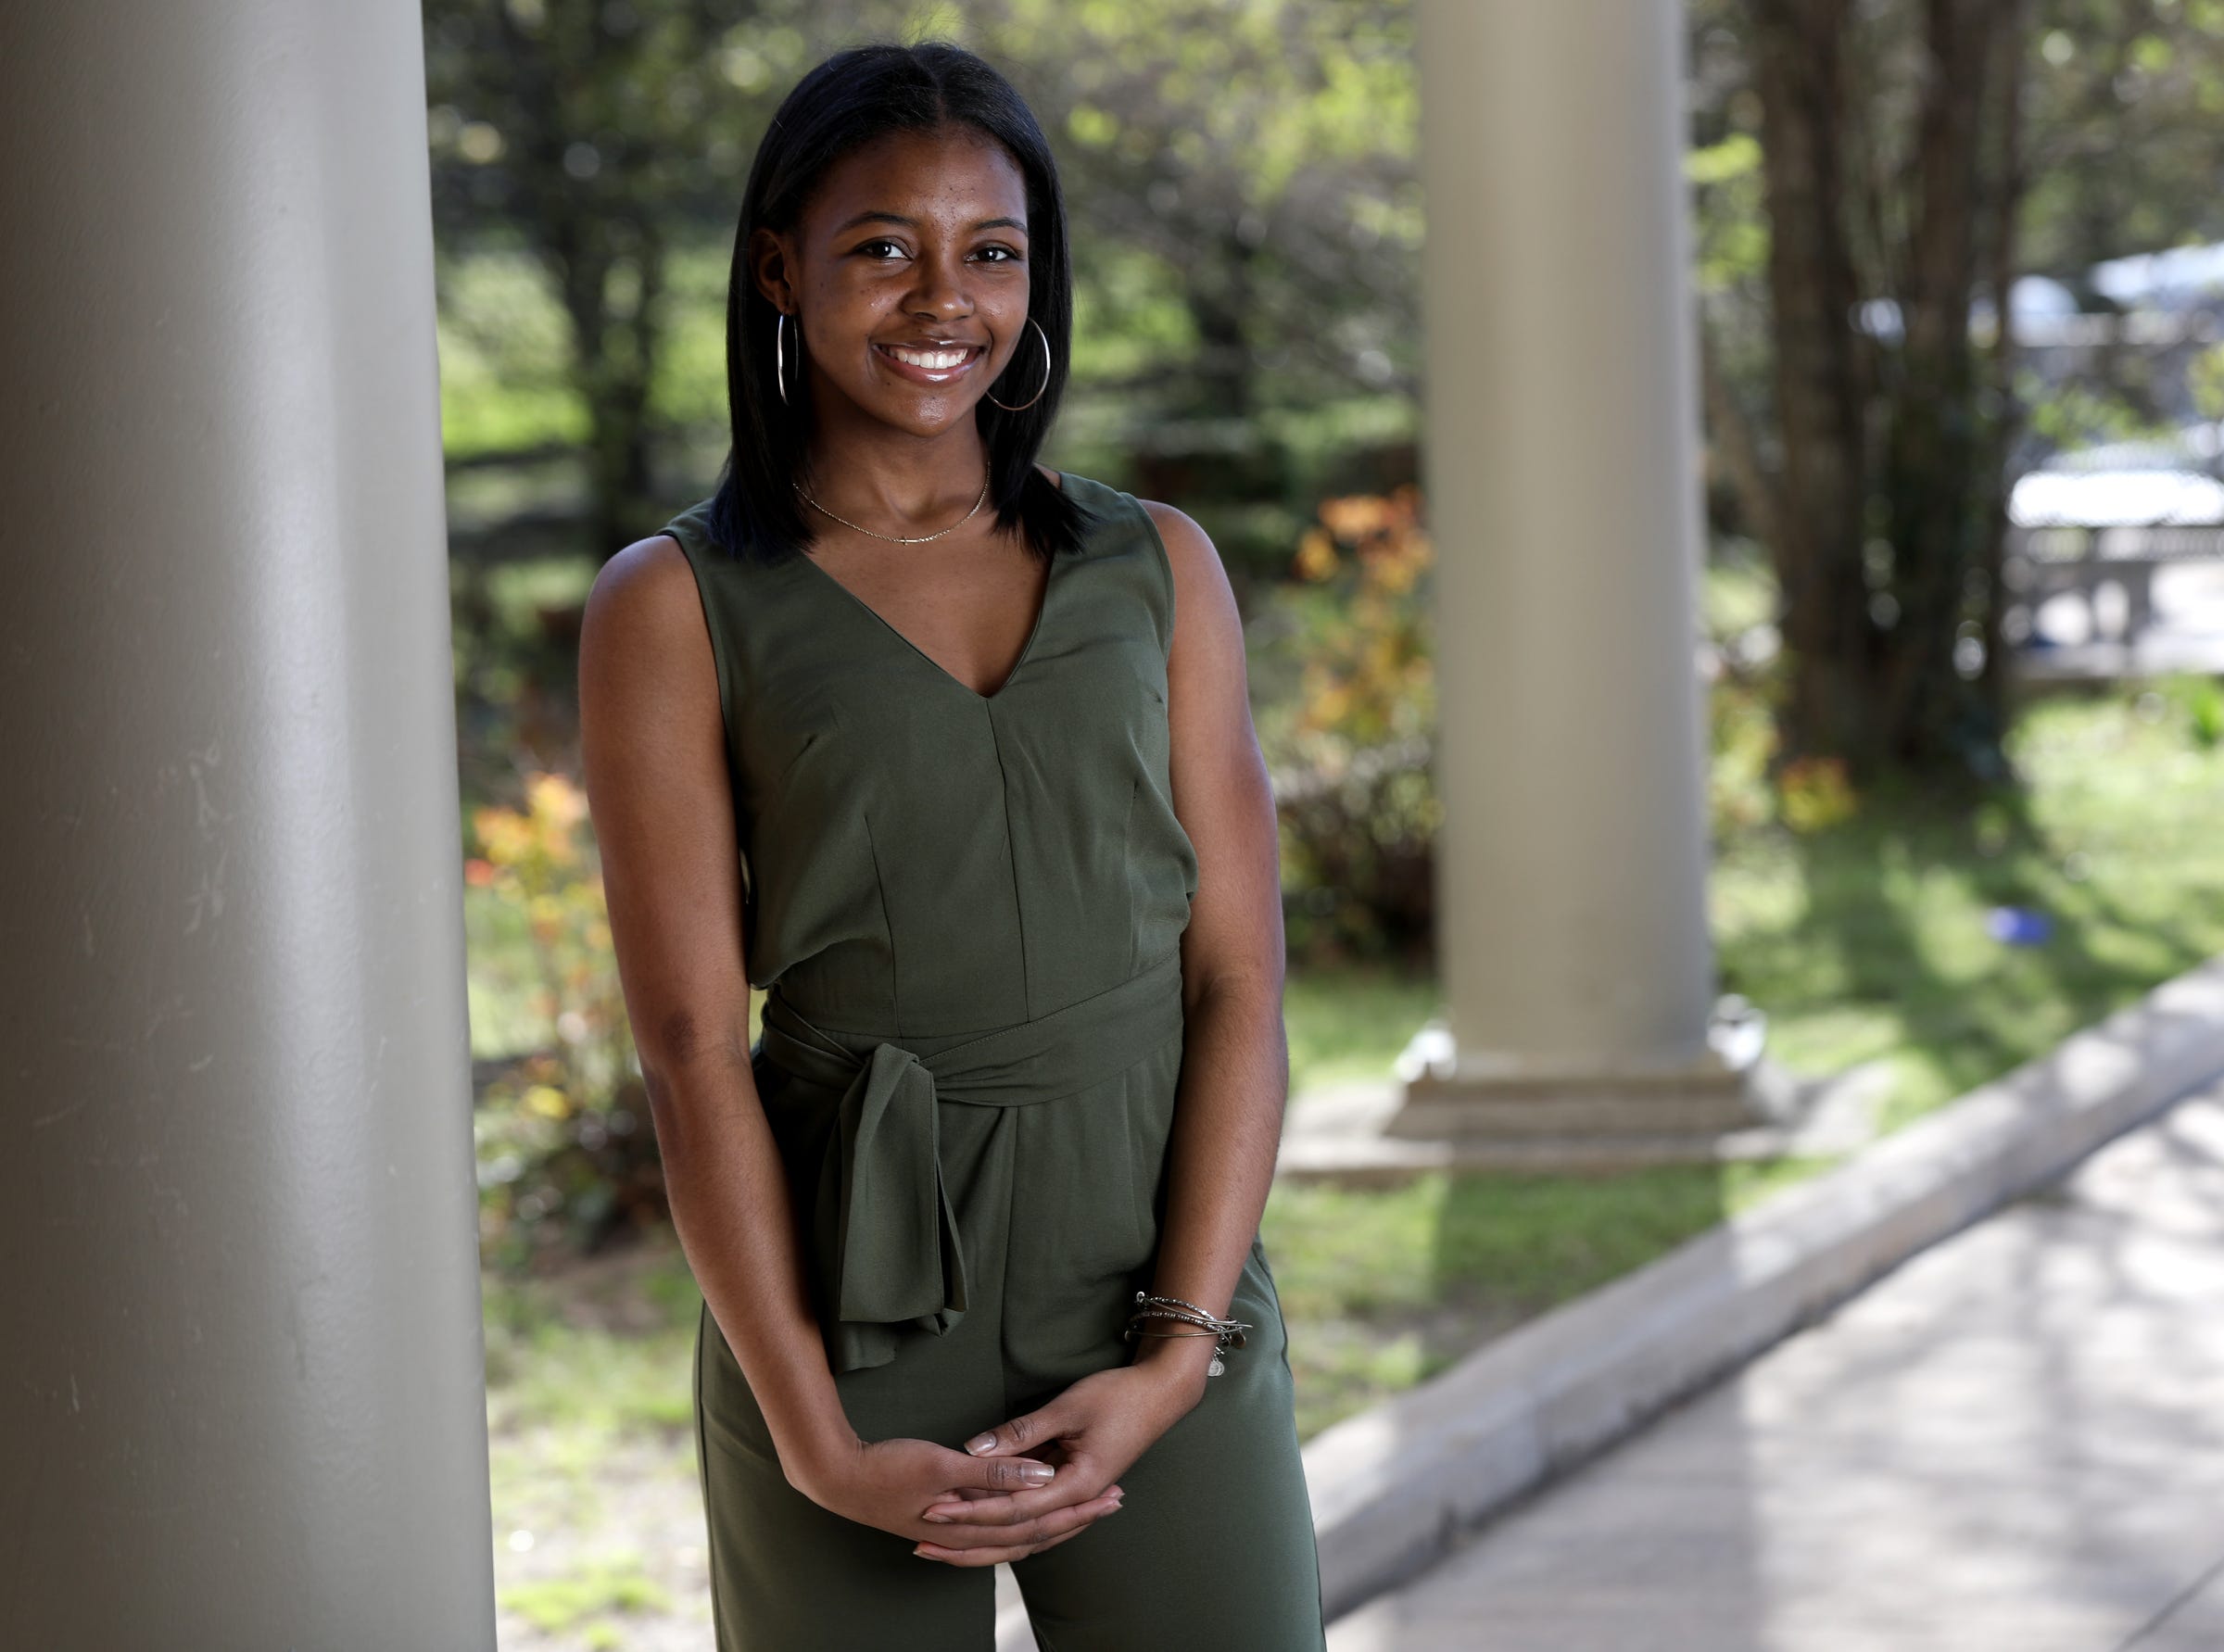 Sade Ried, a senior at Renaissance High School in Detroit, Michigan, plans to study math and computer science at Stanford University.